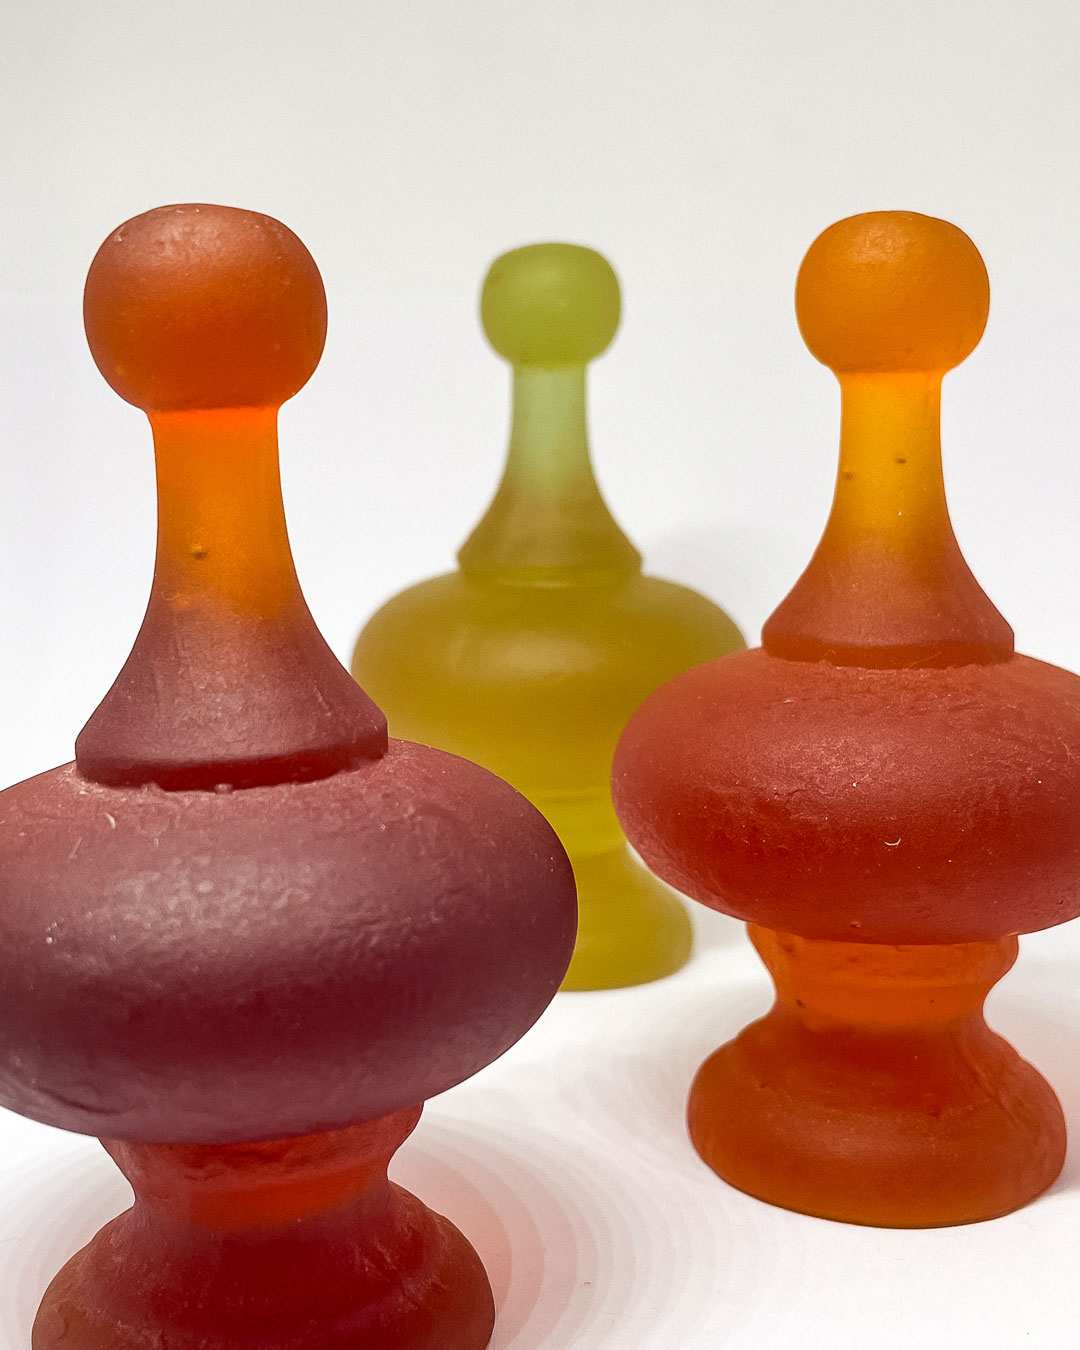 A group of three cast glass finials in Dark Orange, Orange and Rhubarb. They form wonderful light-filled installations in groups.